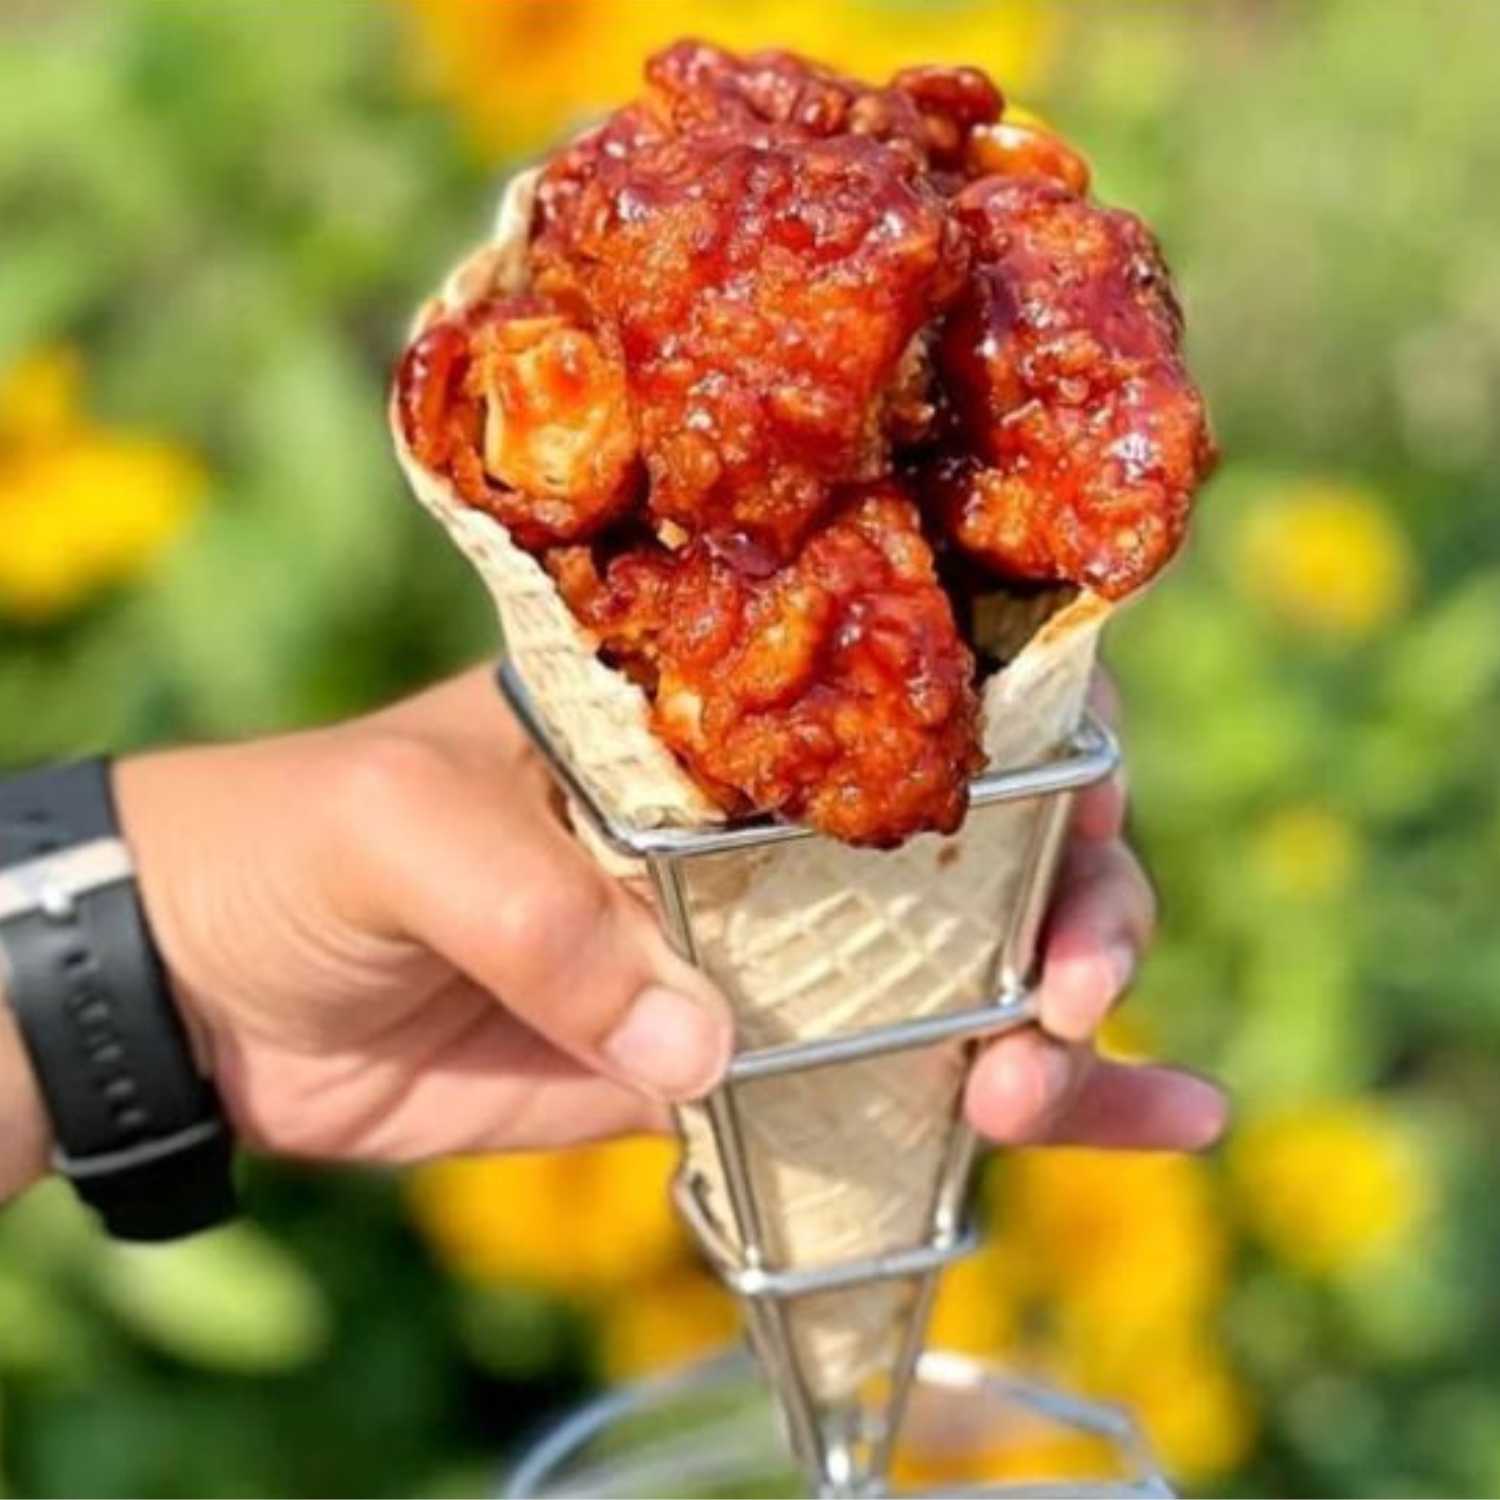 Hot Peri Peri Chicken Fingers in a waffle cone by Chick'n Cone!